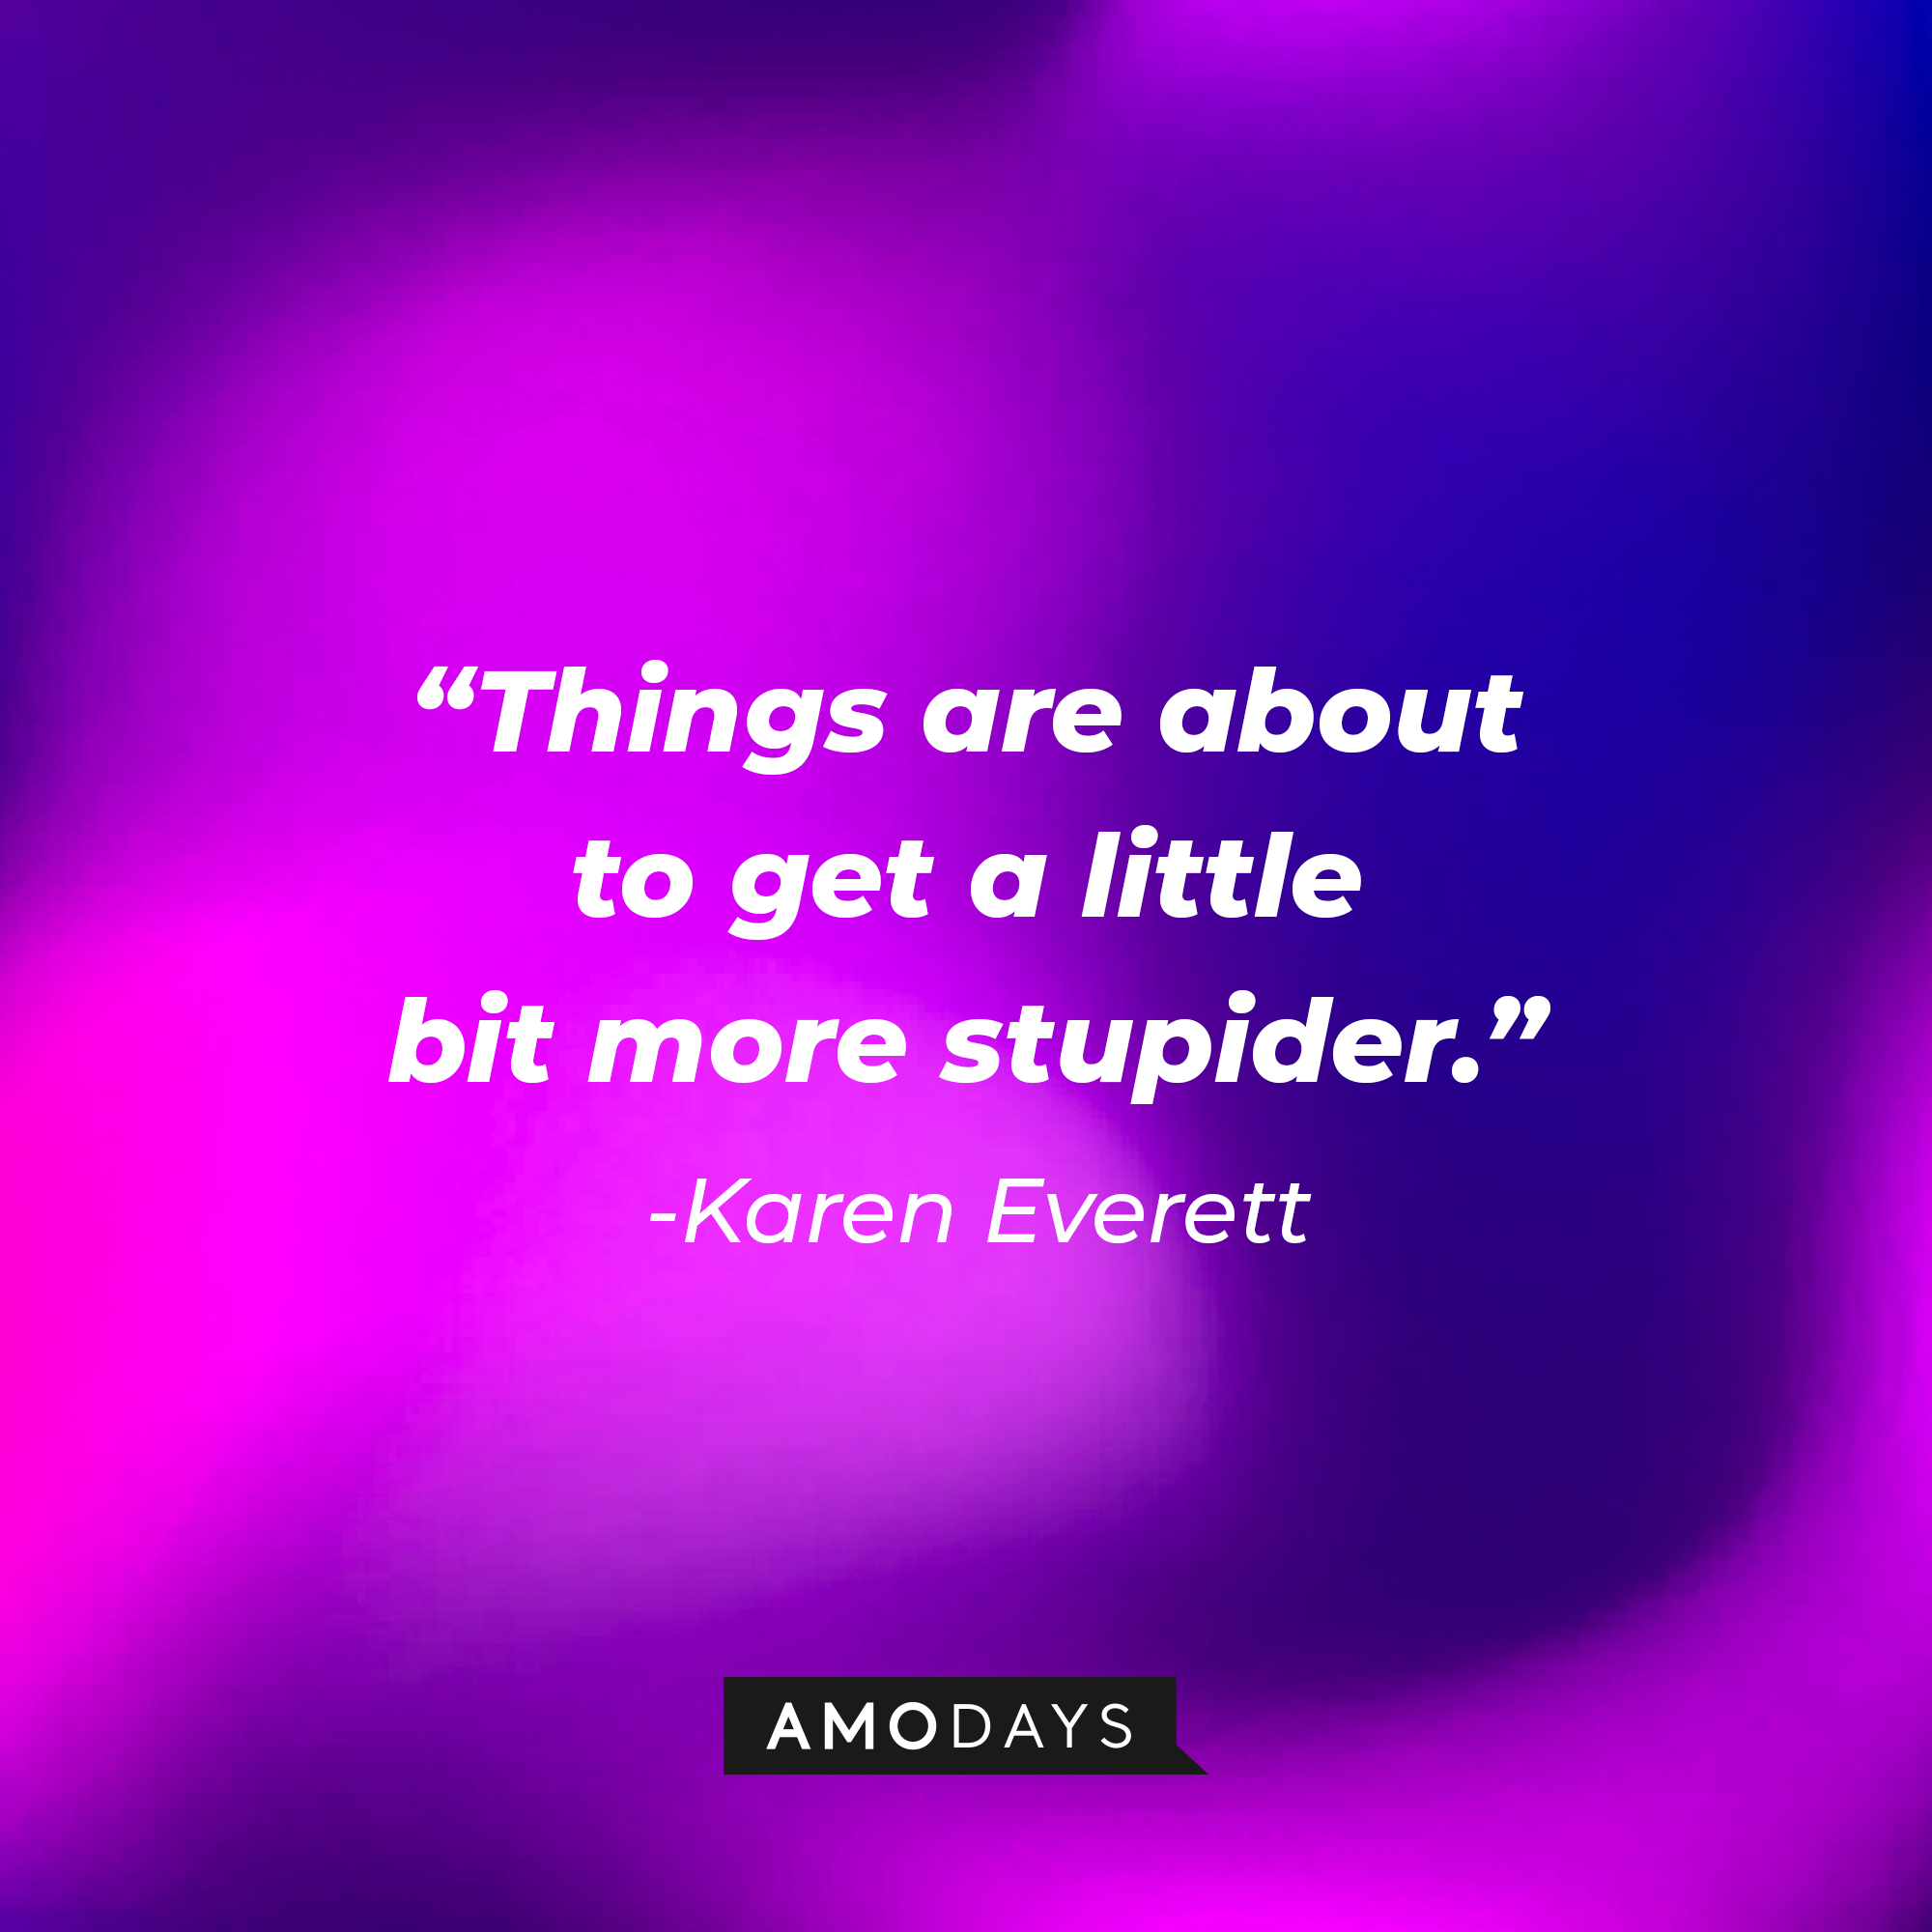 Karen Everett's quote: "Things are about to get a little bit more stupider." | Source: Amodays